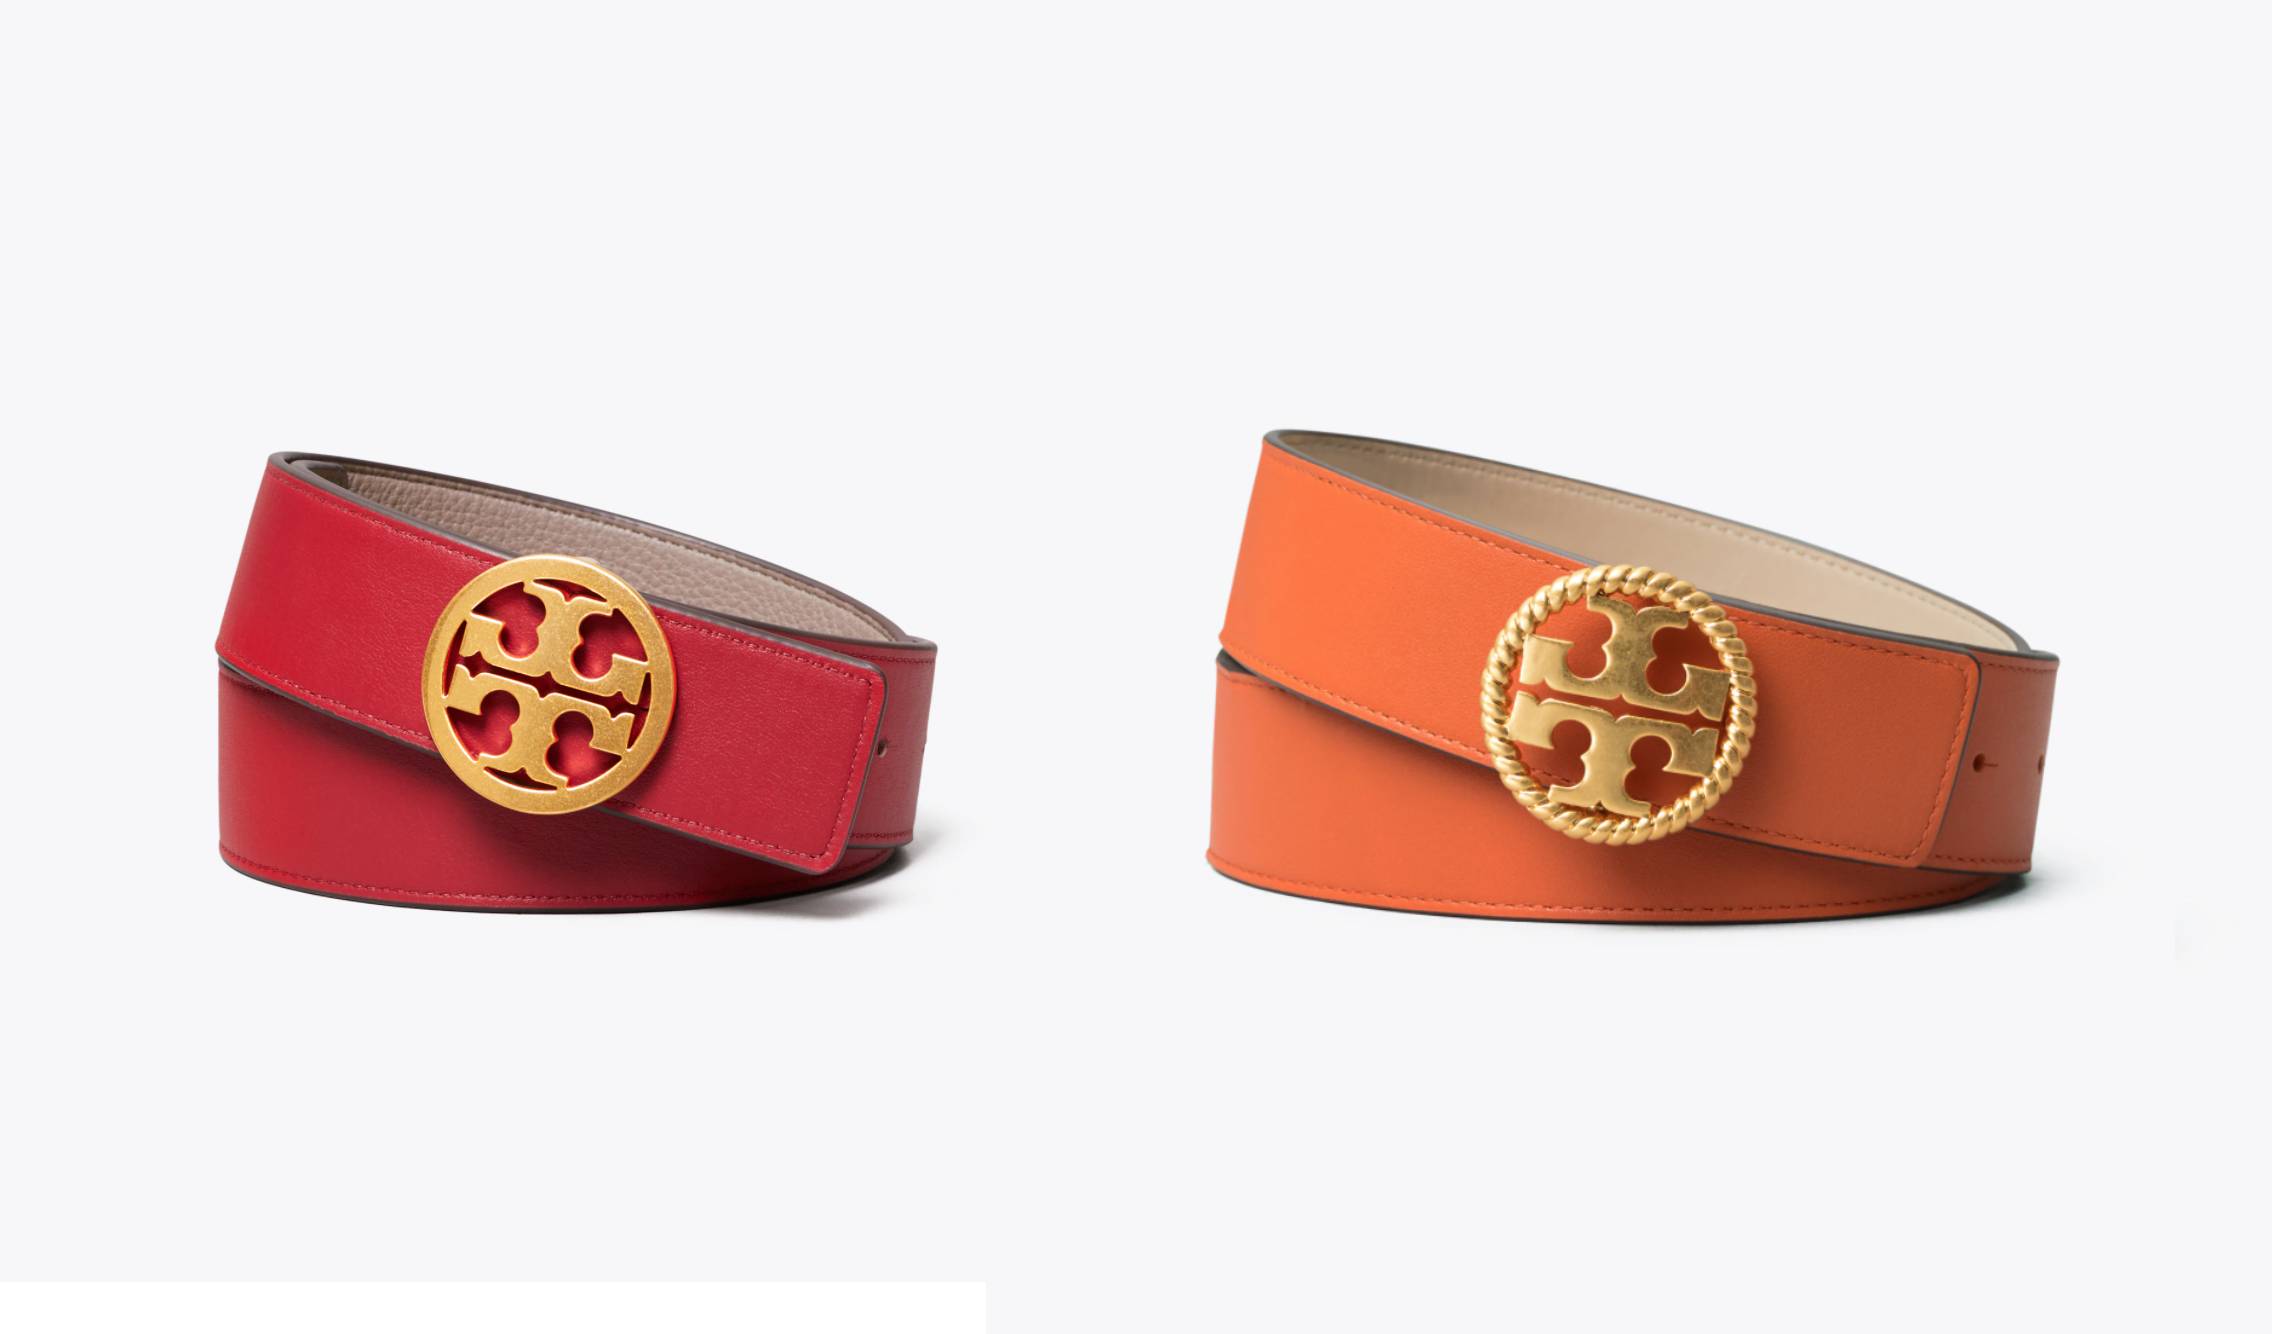 Tory Burch Logo Belts Are the Perfect Statement Accessory